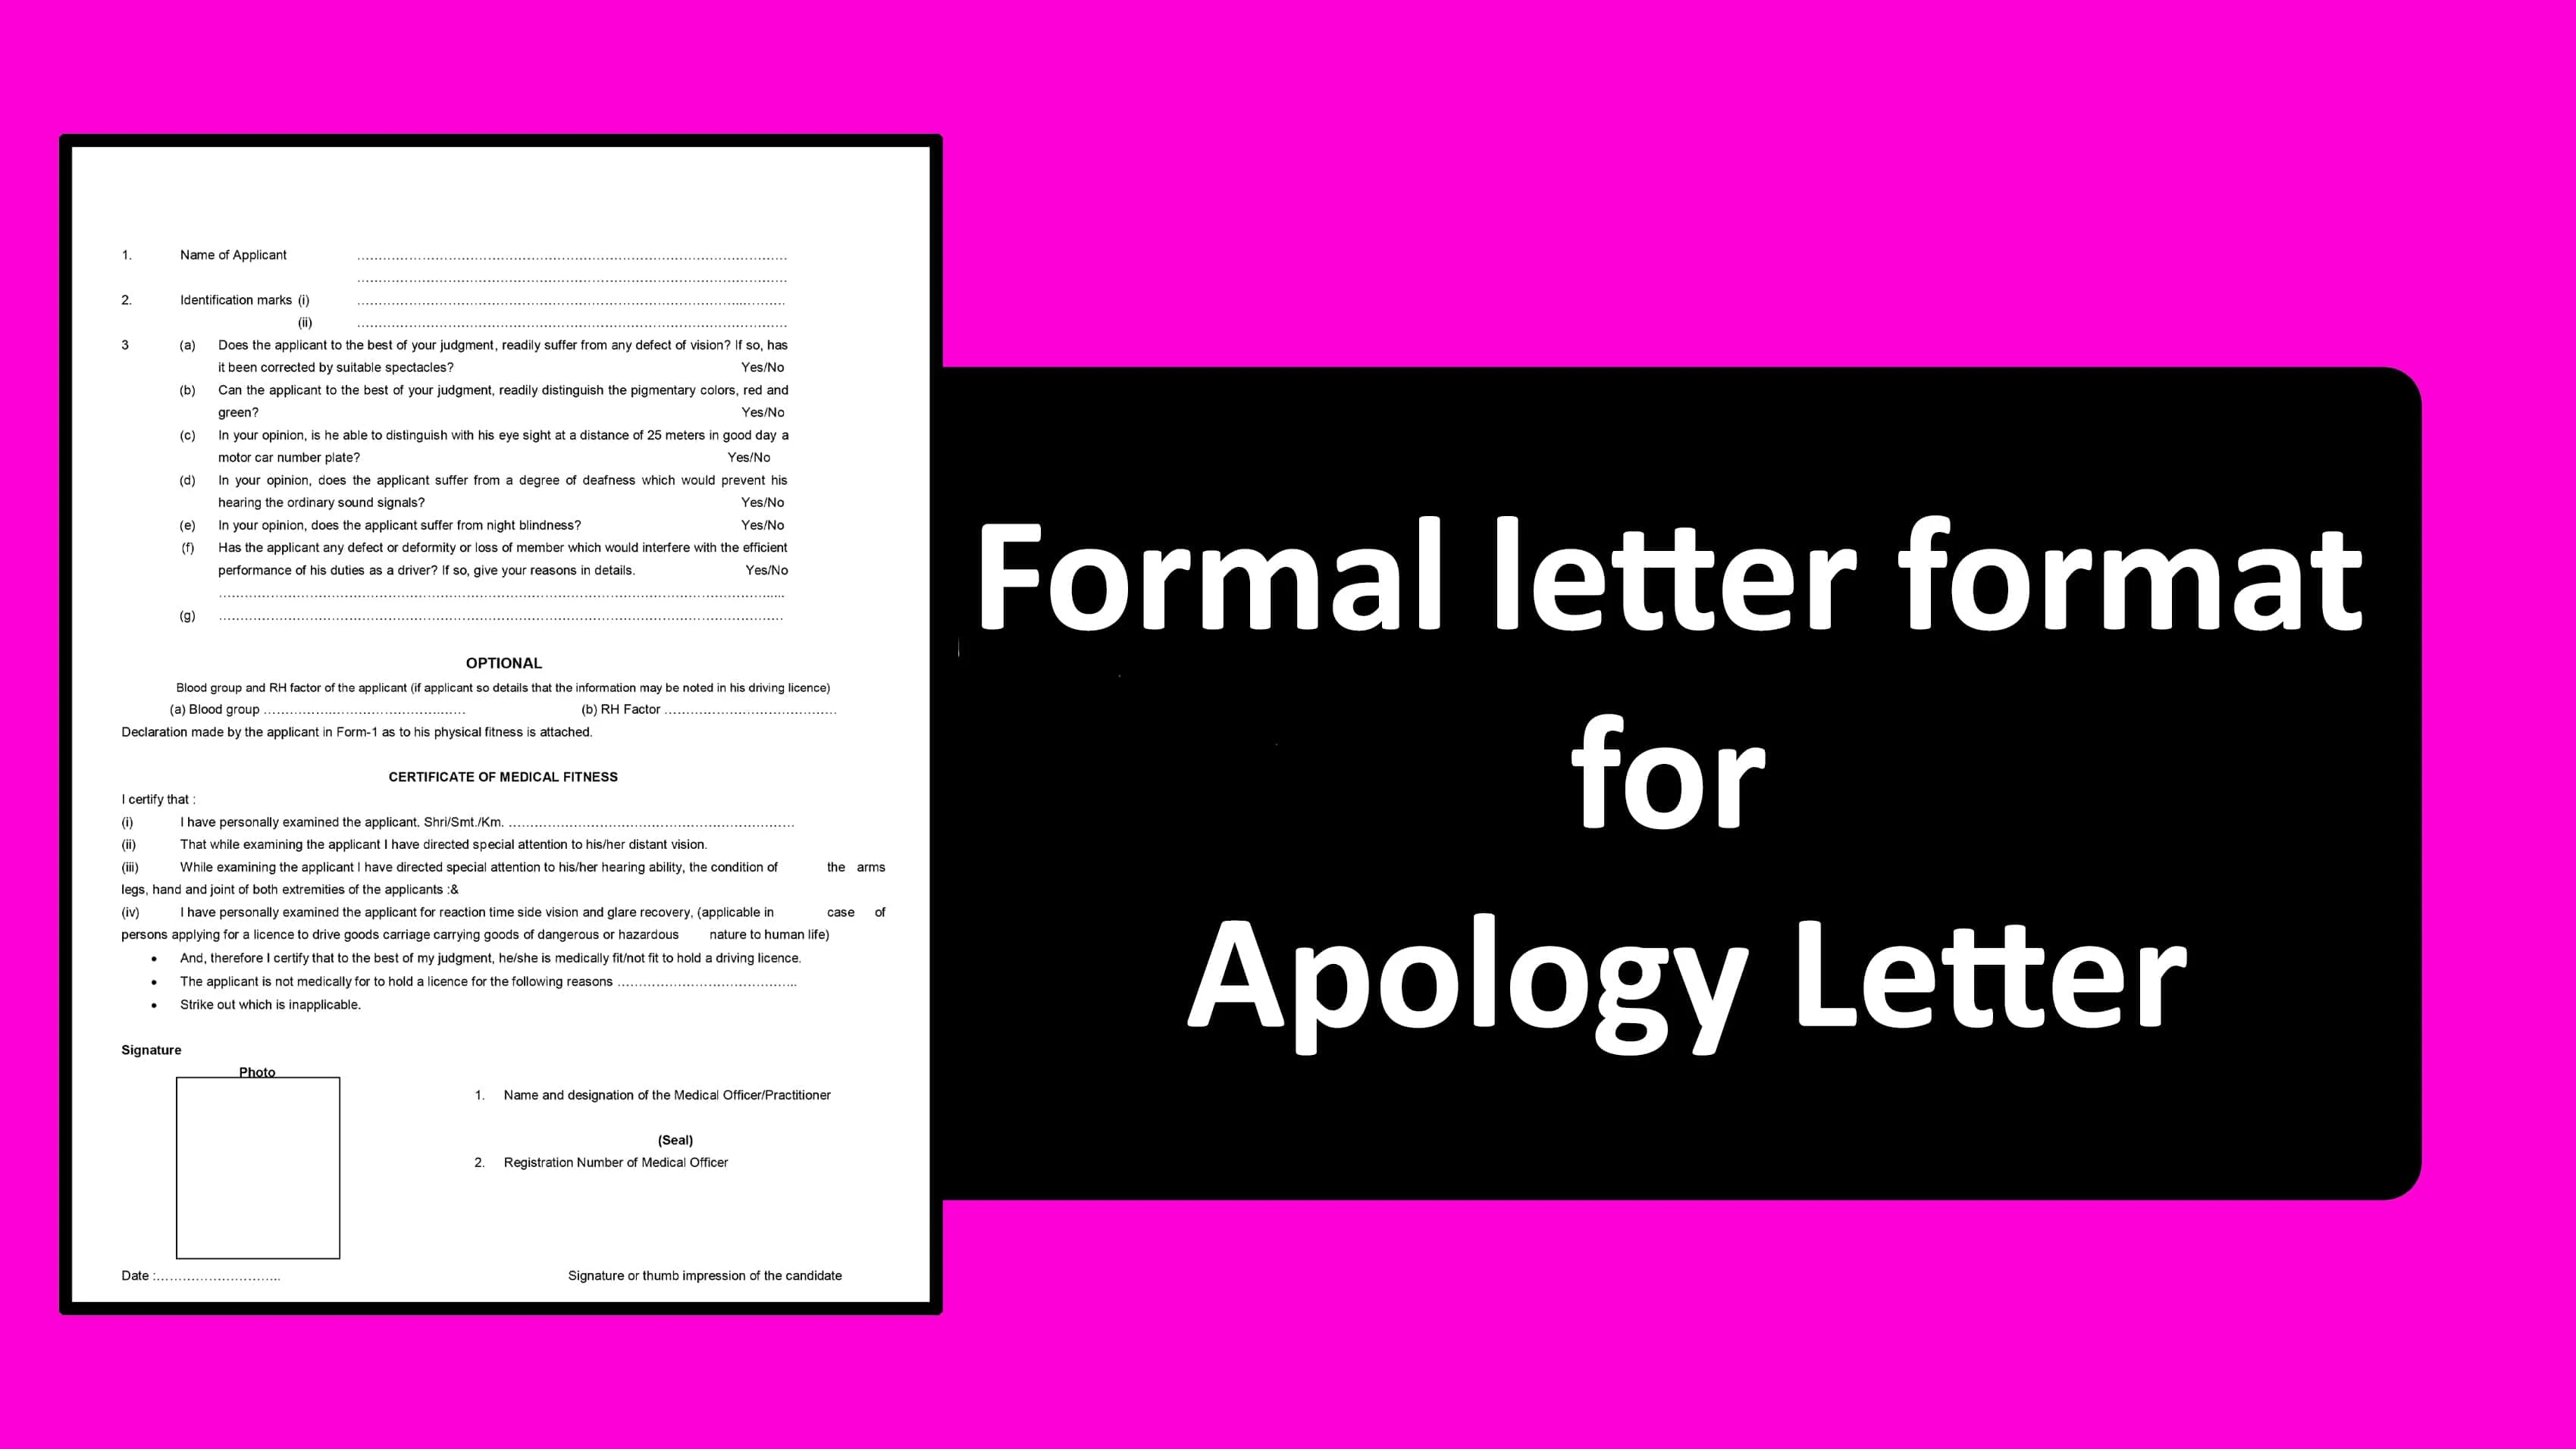 Formal letter format for Apology Letter - How to Write and Apology Letter Samples for You